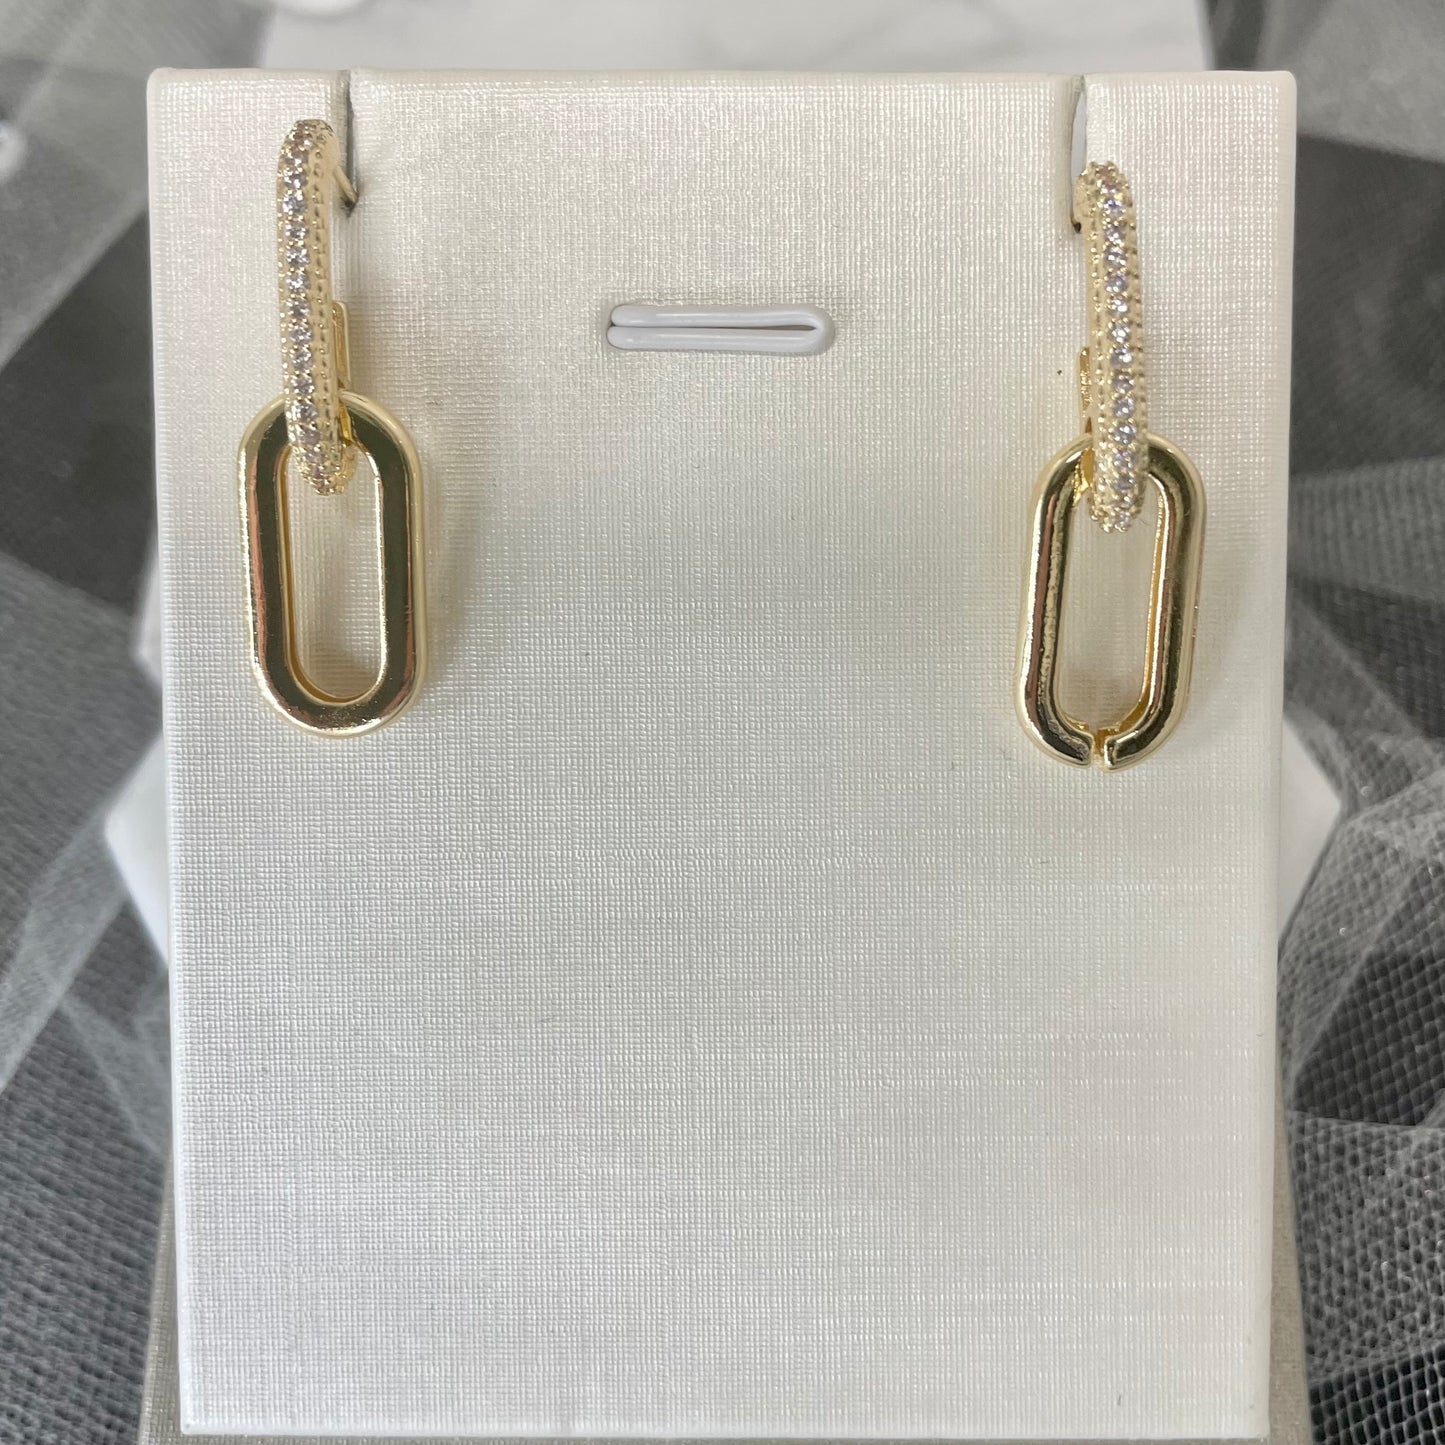 "Brenda Gold Earrings featuring two exquisite oval shapes, showcasing timeless elegance and sophistication."